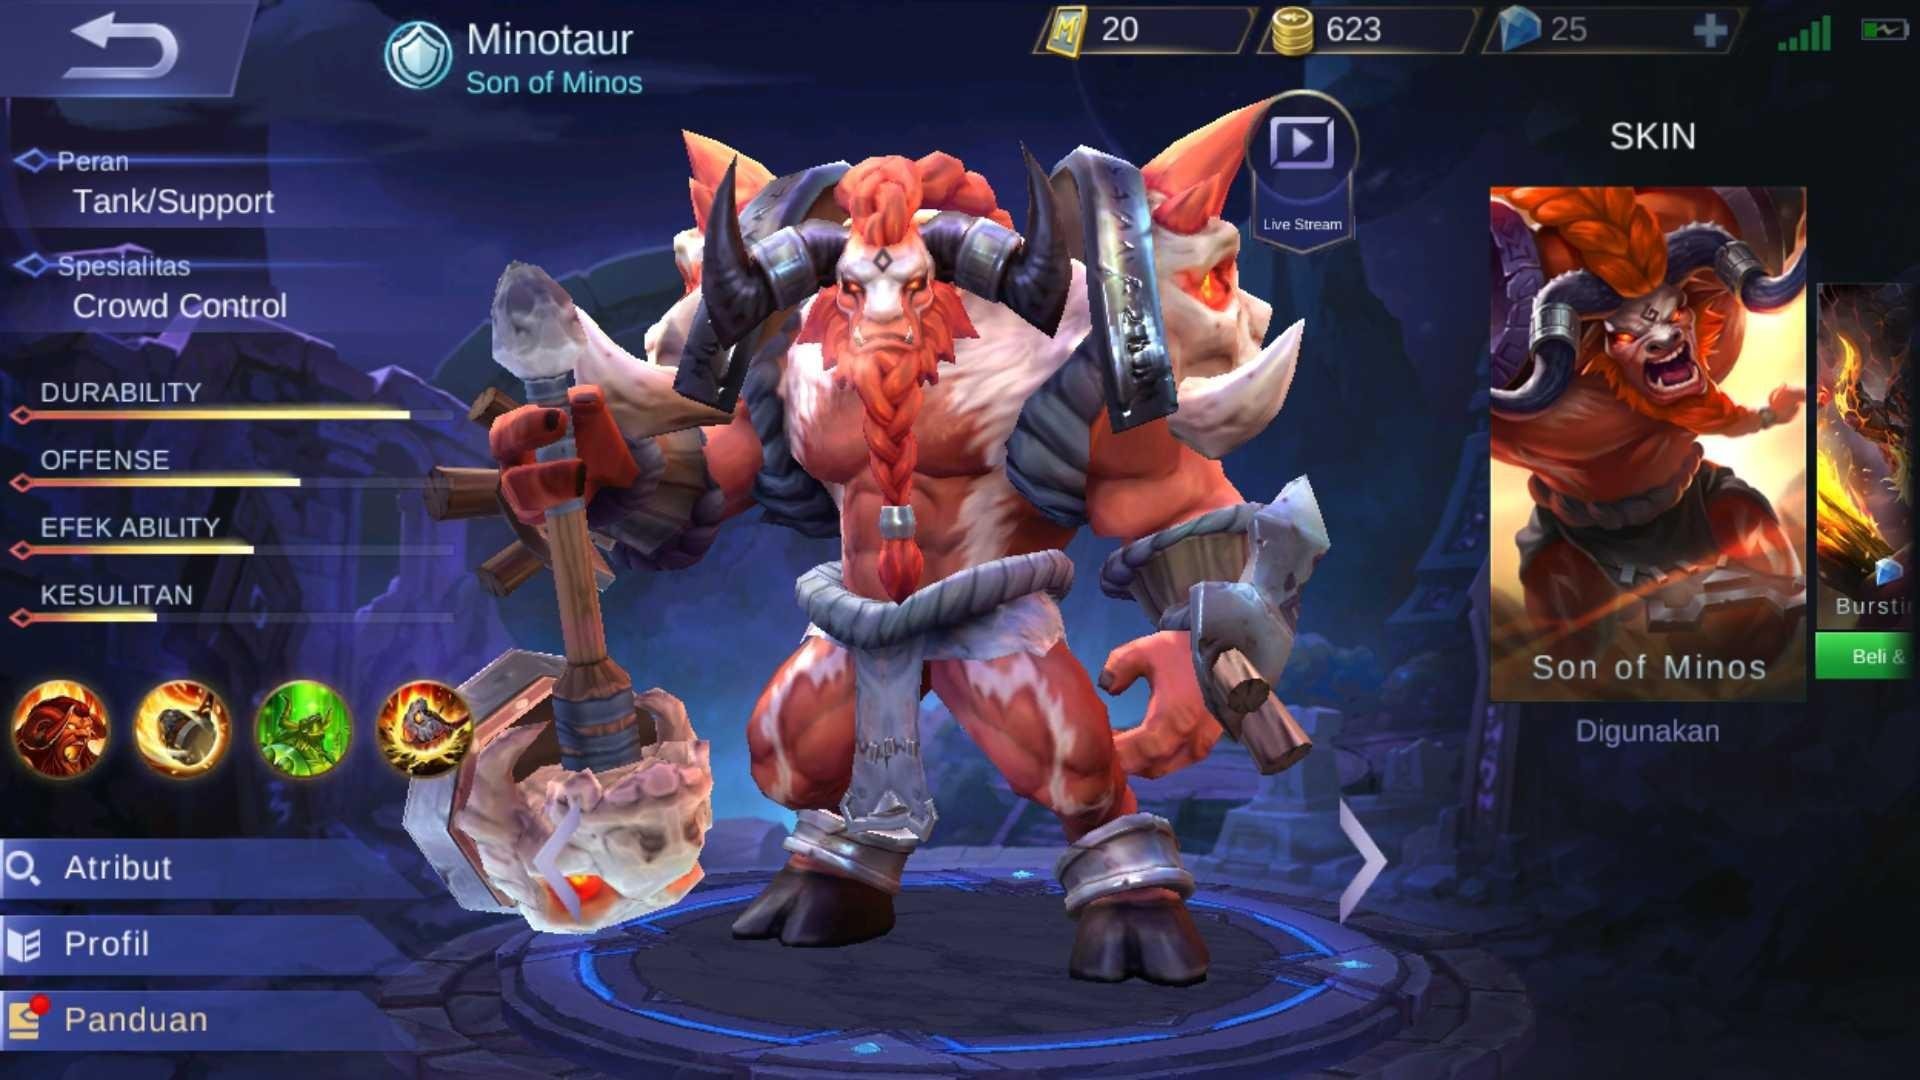 How I Get My Star In Ranked With Minotaur Mobile Legend Bang Bang